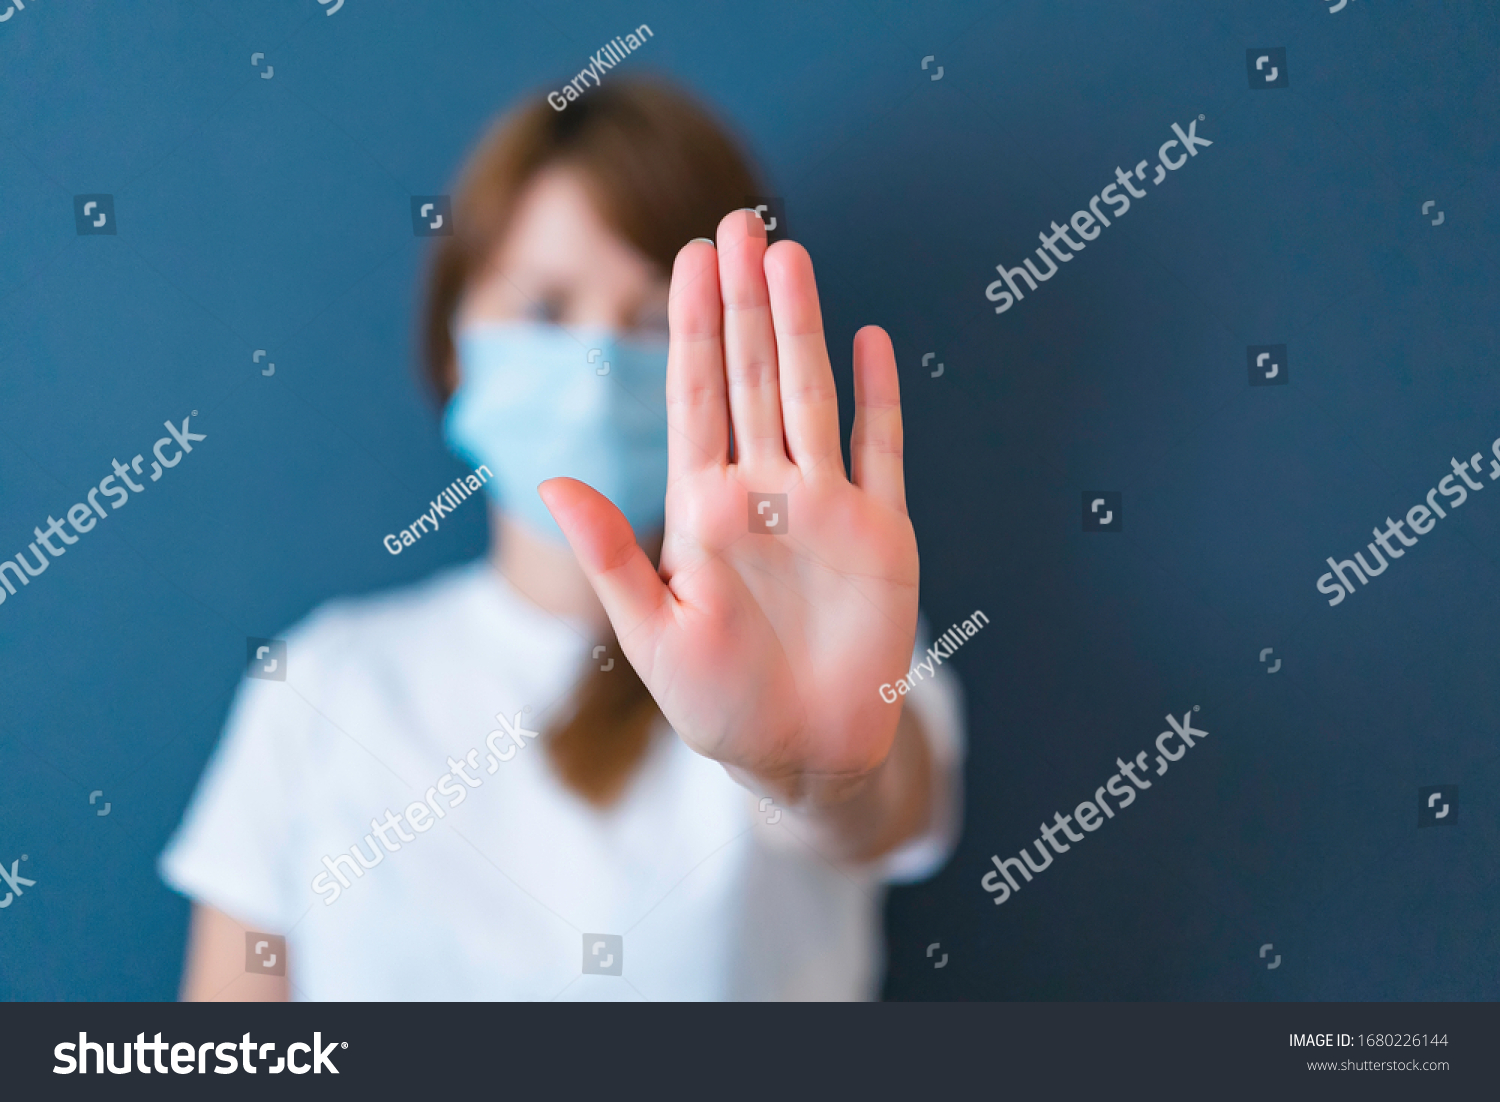 Coronavirus concept. Girl wearing mask for protection from disease and show stop hands gesture for stop corona virus outbreak. Global call to stay home #1680226144